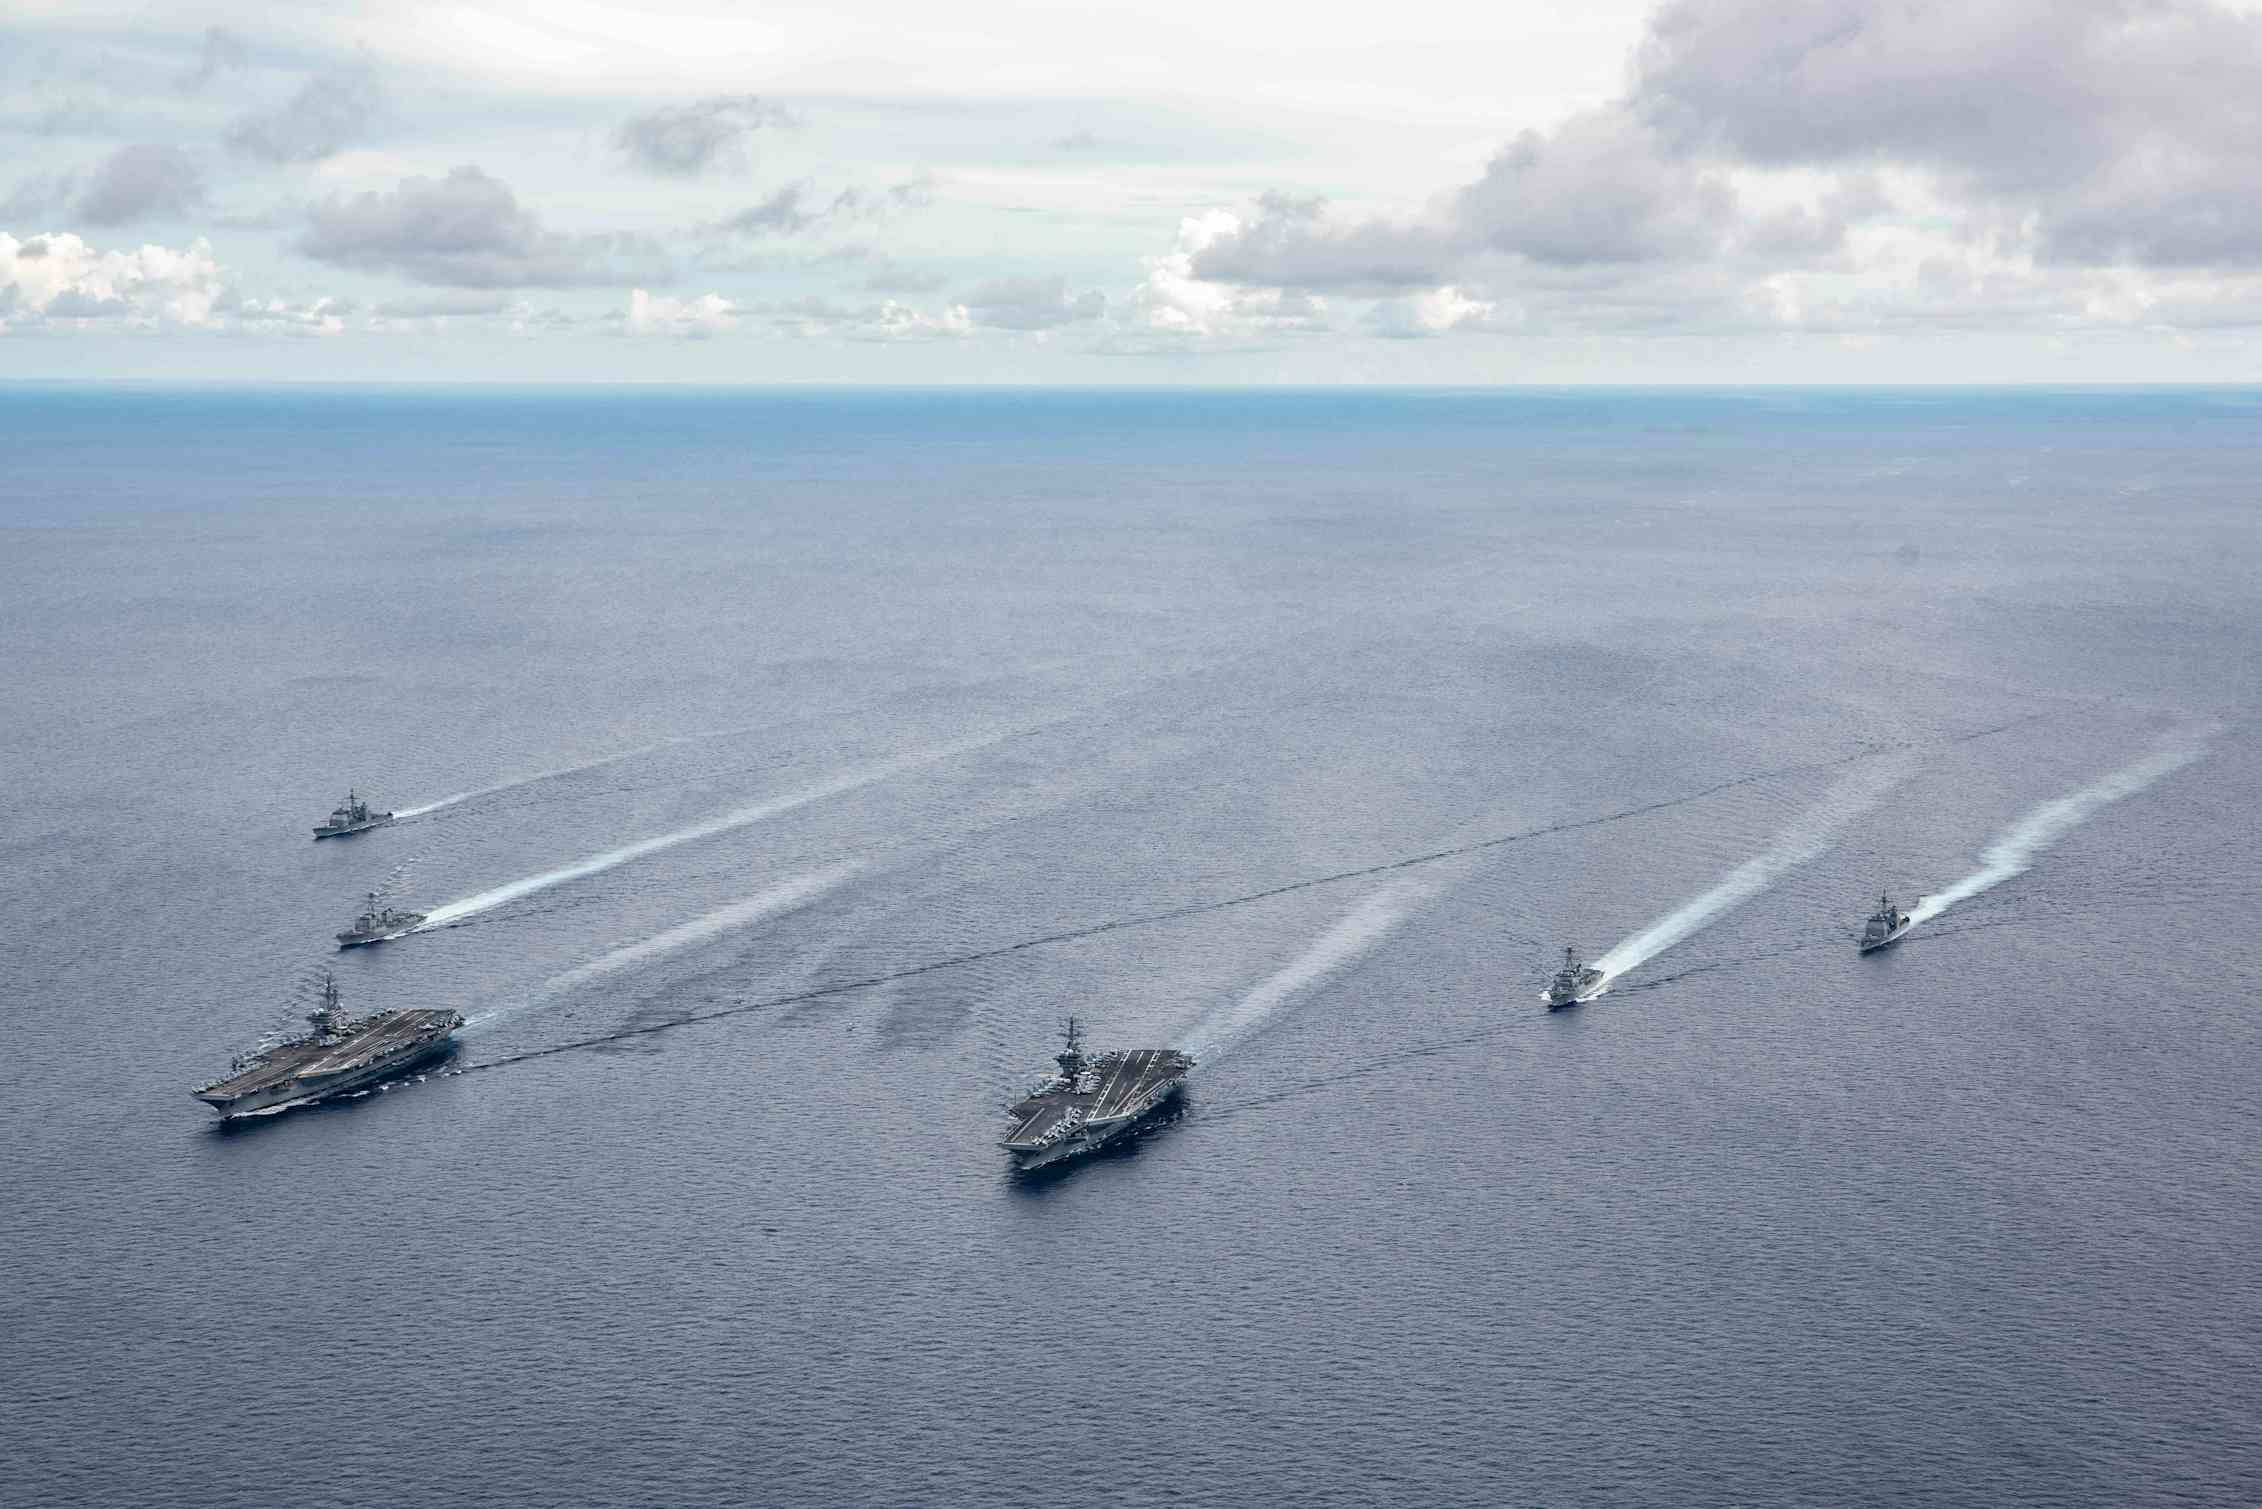 US warships in the South China Sea